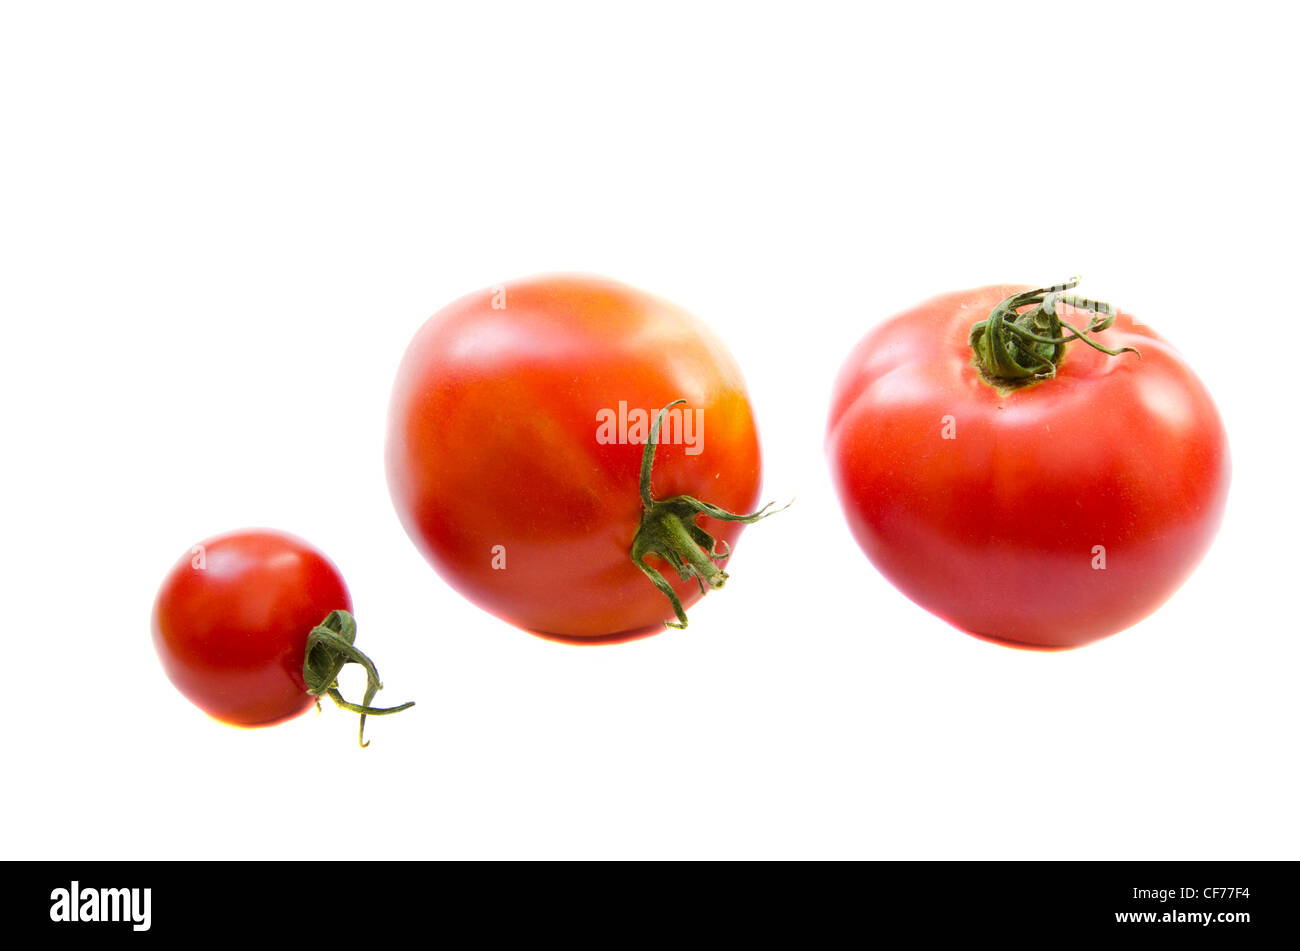 Tomato vegetable isolated on white background. Healthy natural foods. Stock Photo